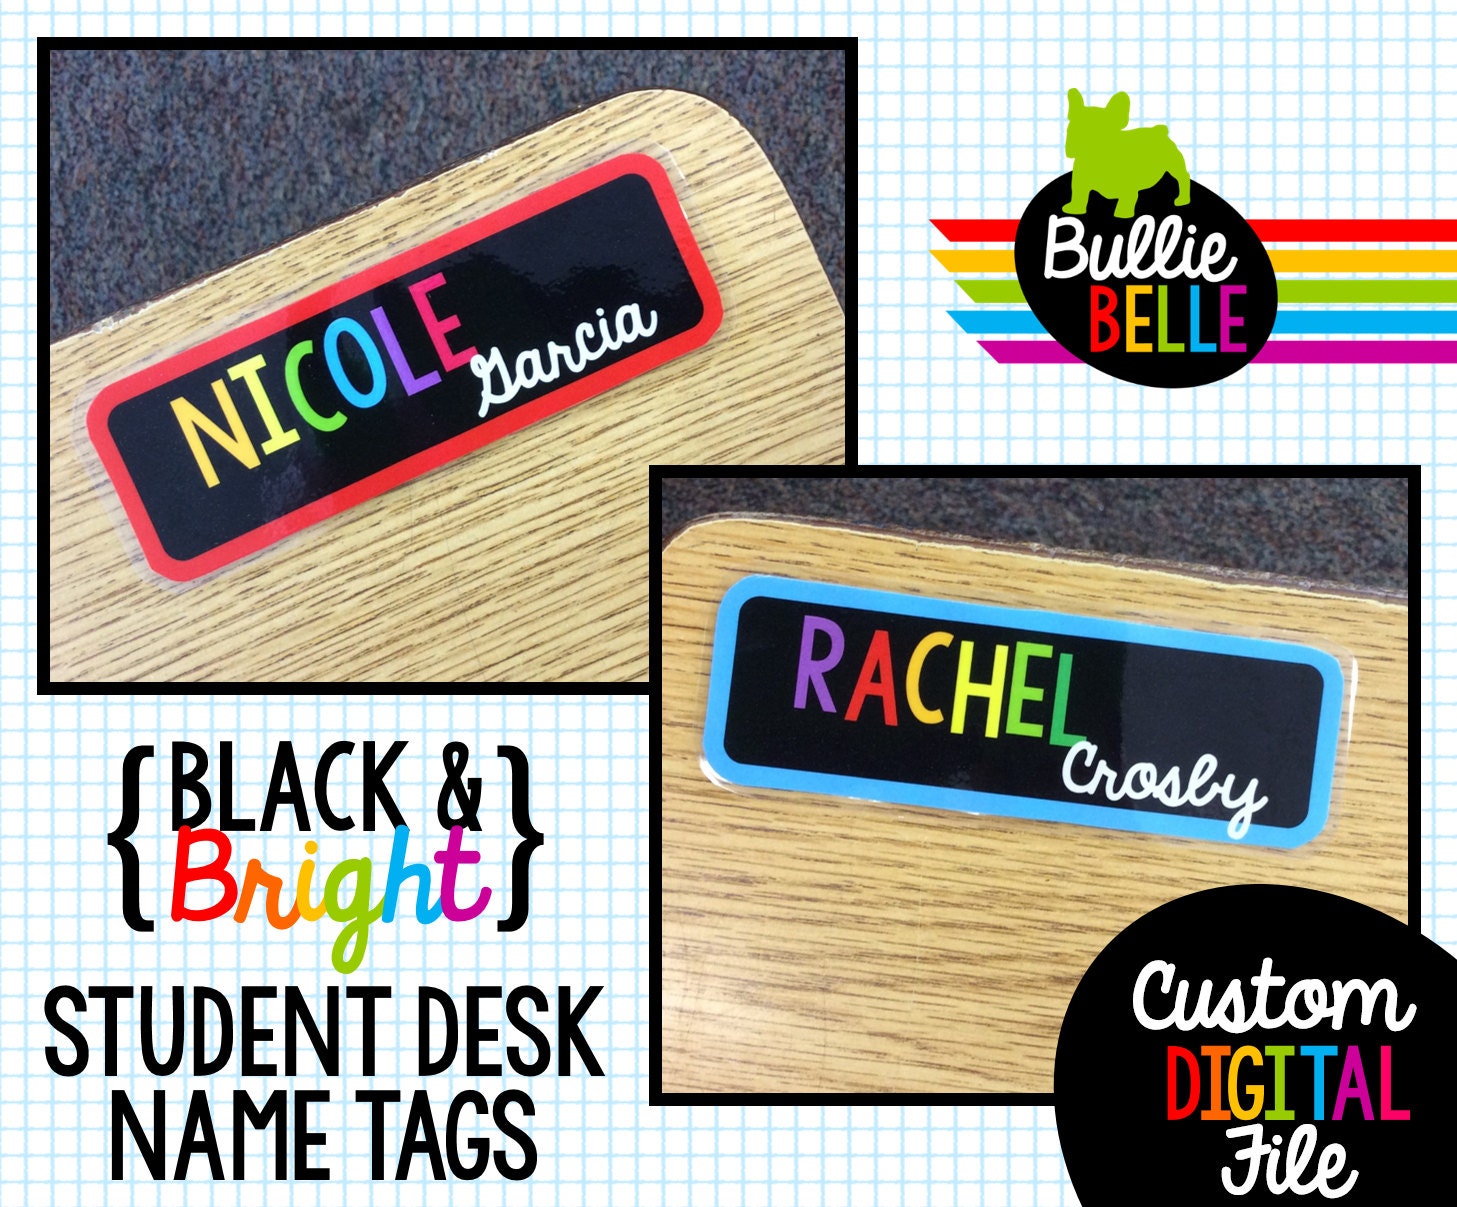 black-bright-student-desk-name-tags-student-by-bulliebelle